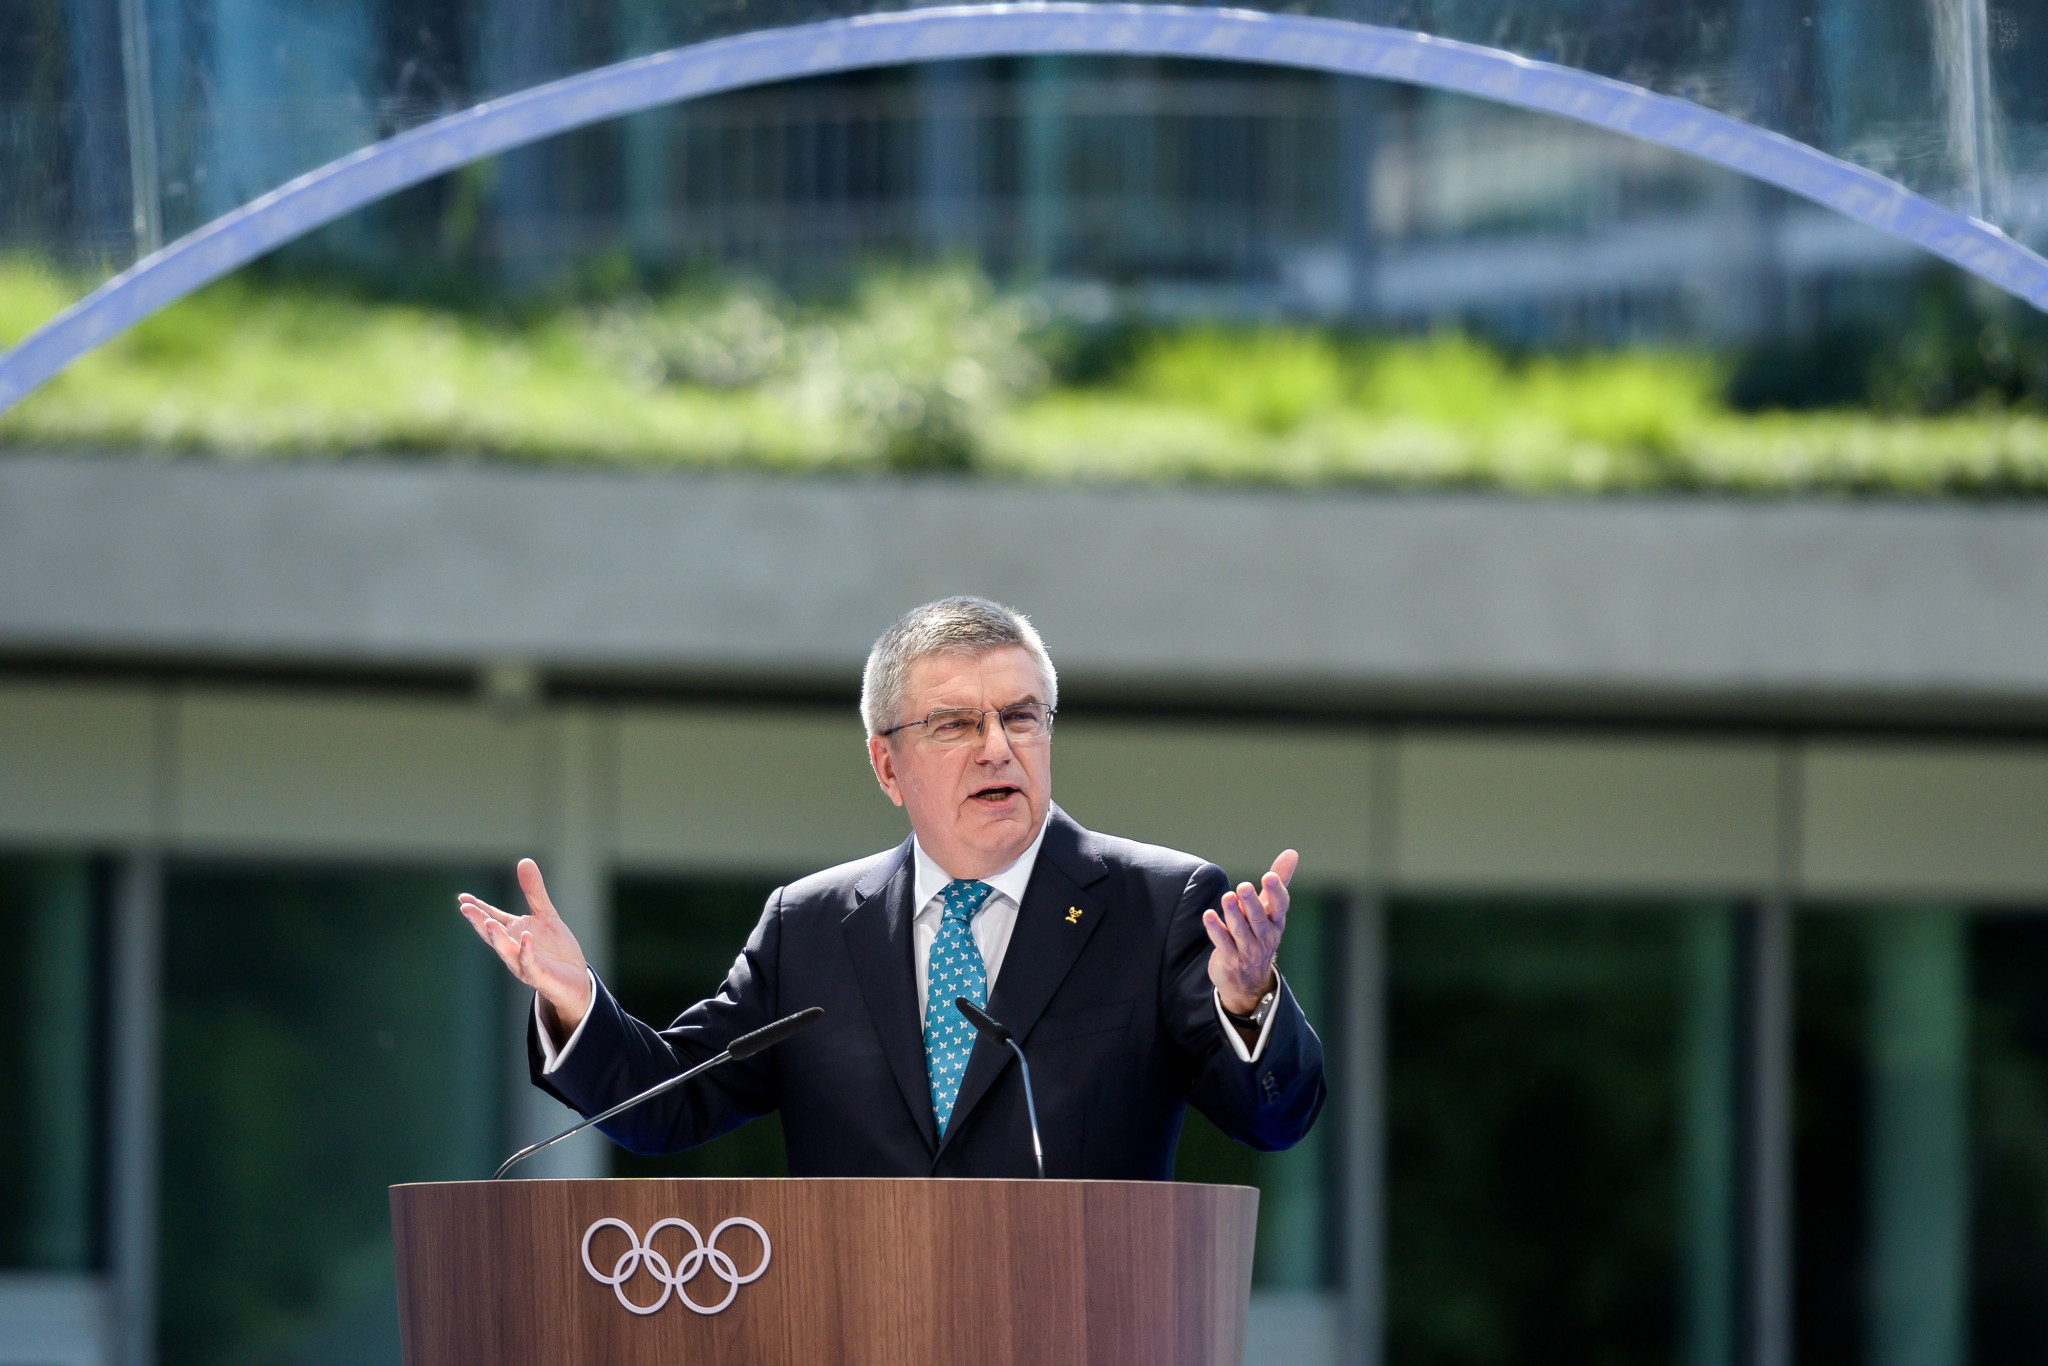 Christiana Figueres expressed her hope the IOC and its President Thomas Bach, seen here at the opening of Olympic House in Lausanne, which he claims is a fully sustainable building, can take more of a leadership role ©Getty Images